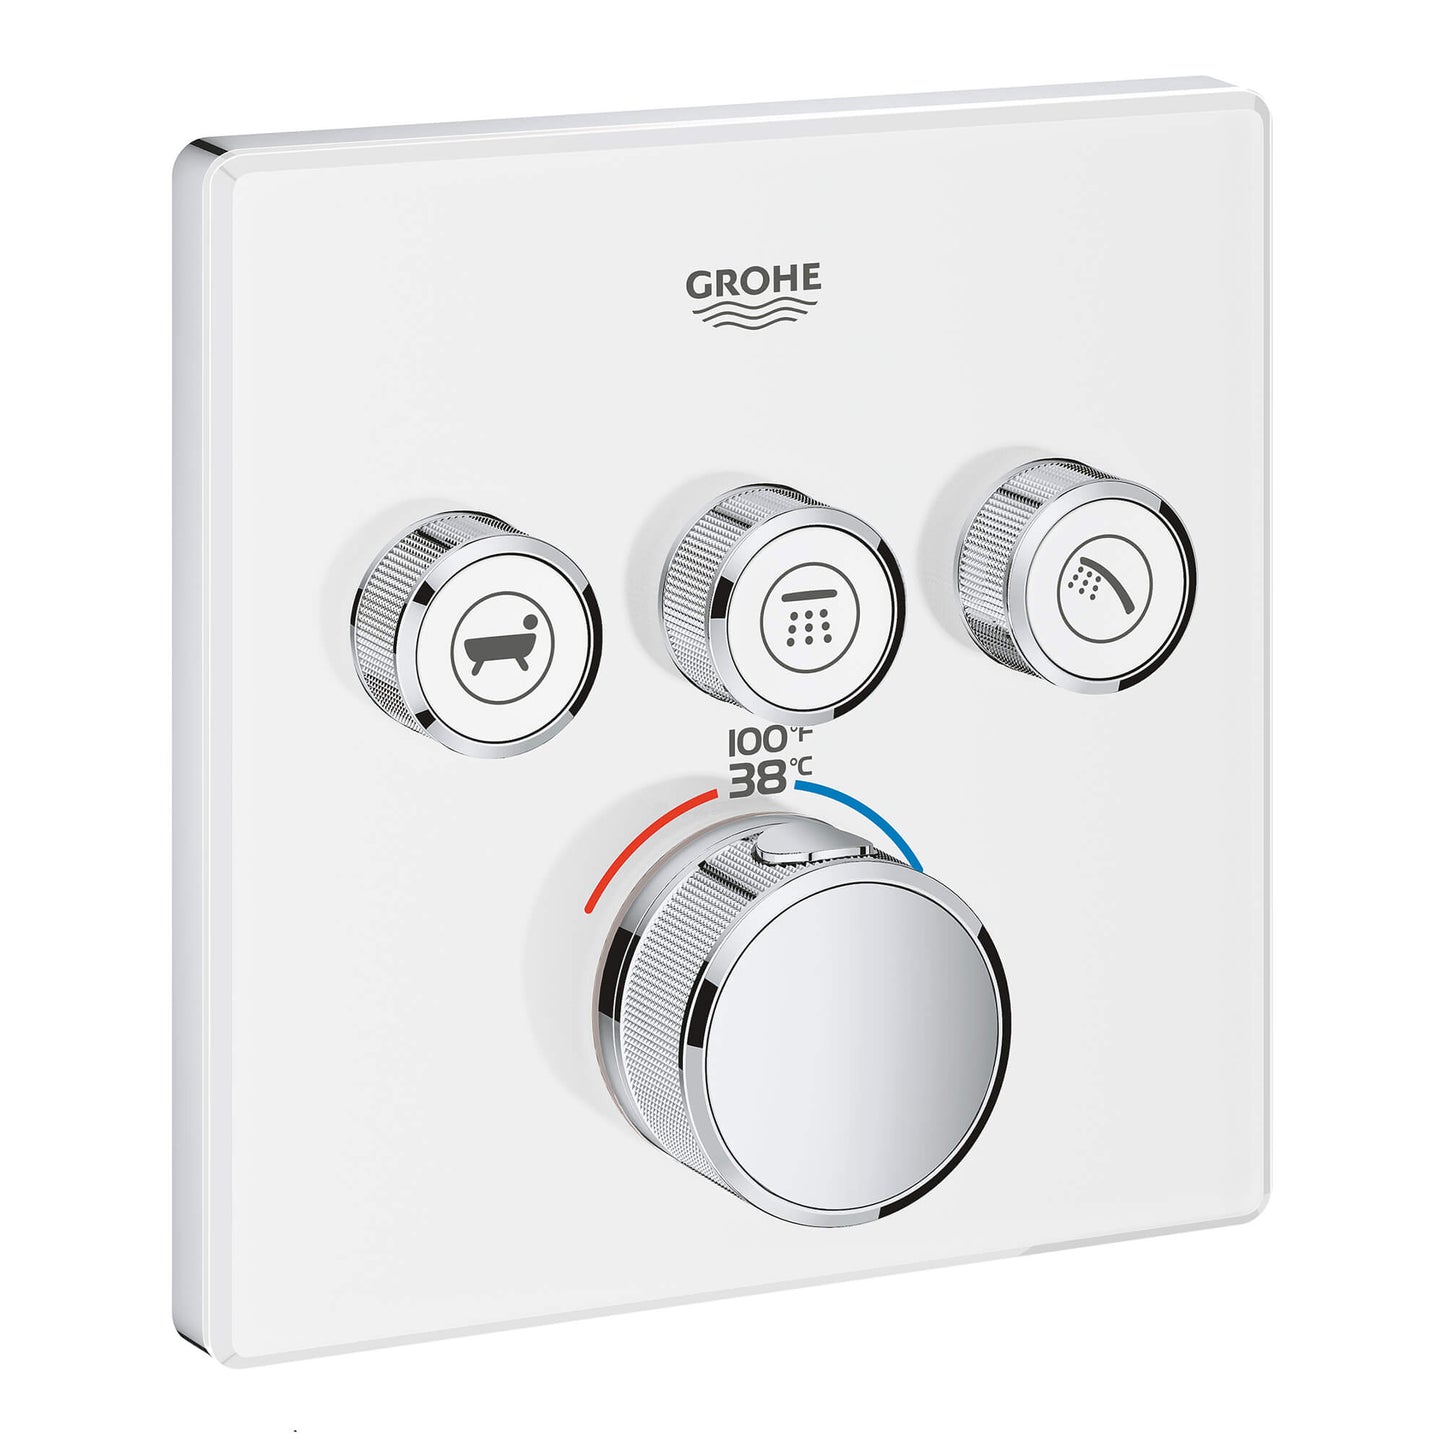 GROHE 29165LS0 Grohtherm Moon White Triple Function Thermostatic Valve Trim